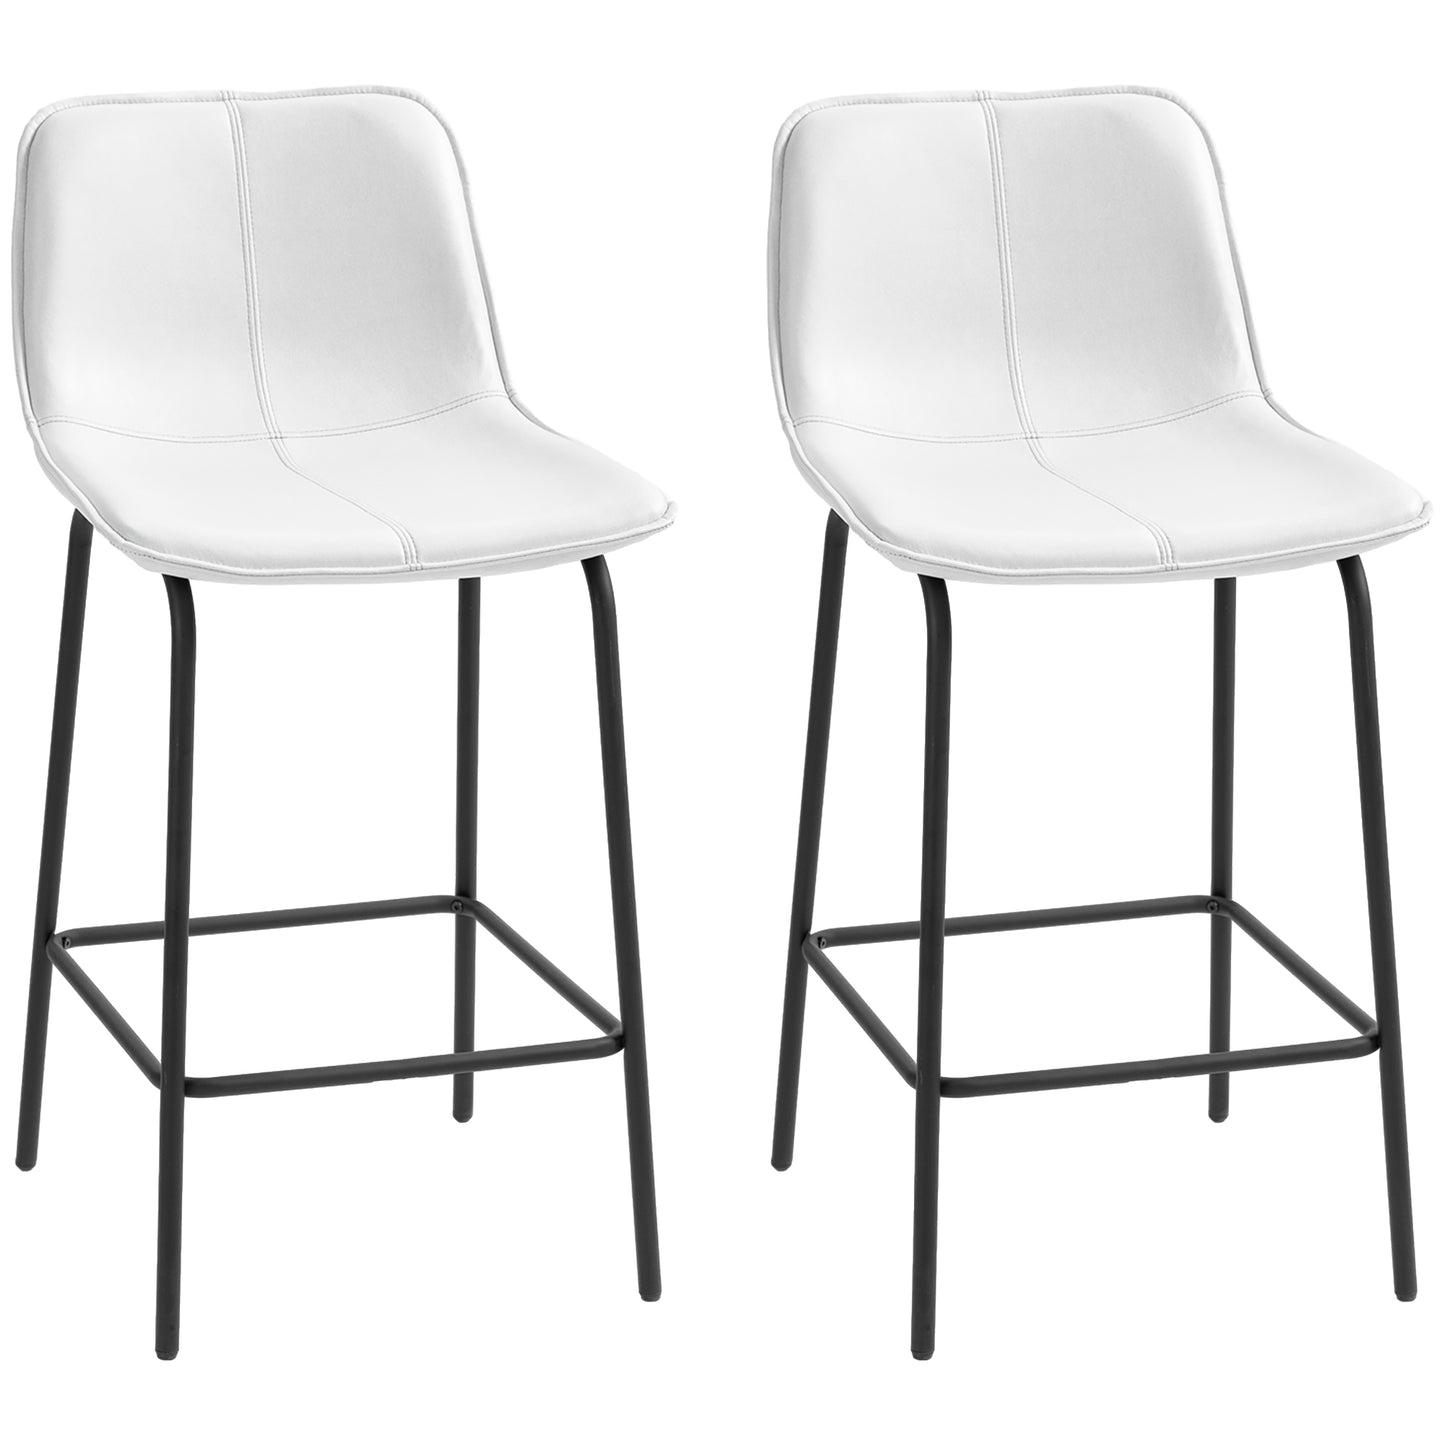 SET OF 2 Upholstered Bar Stools Counter Height with Steel Legs in White